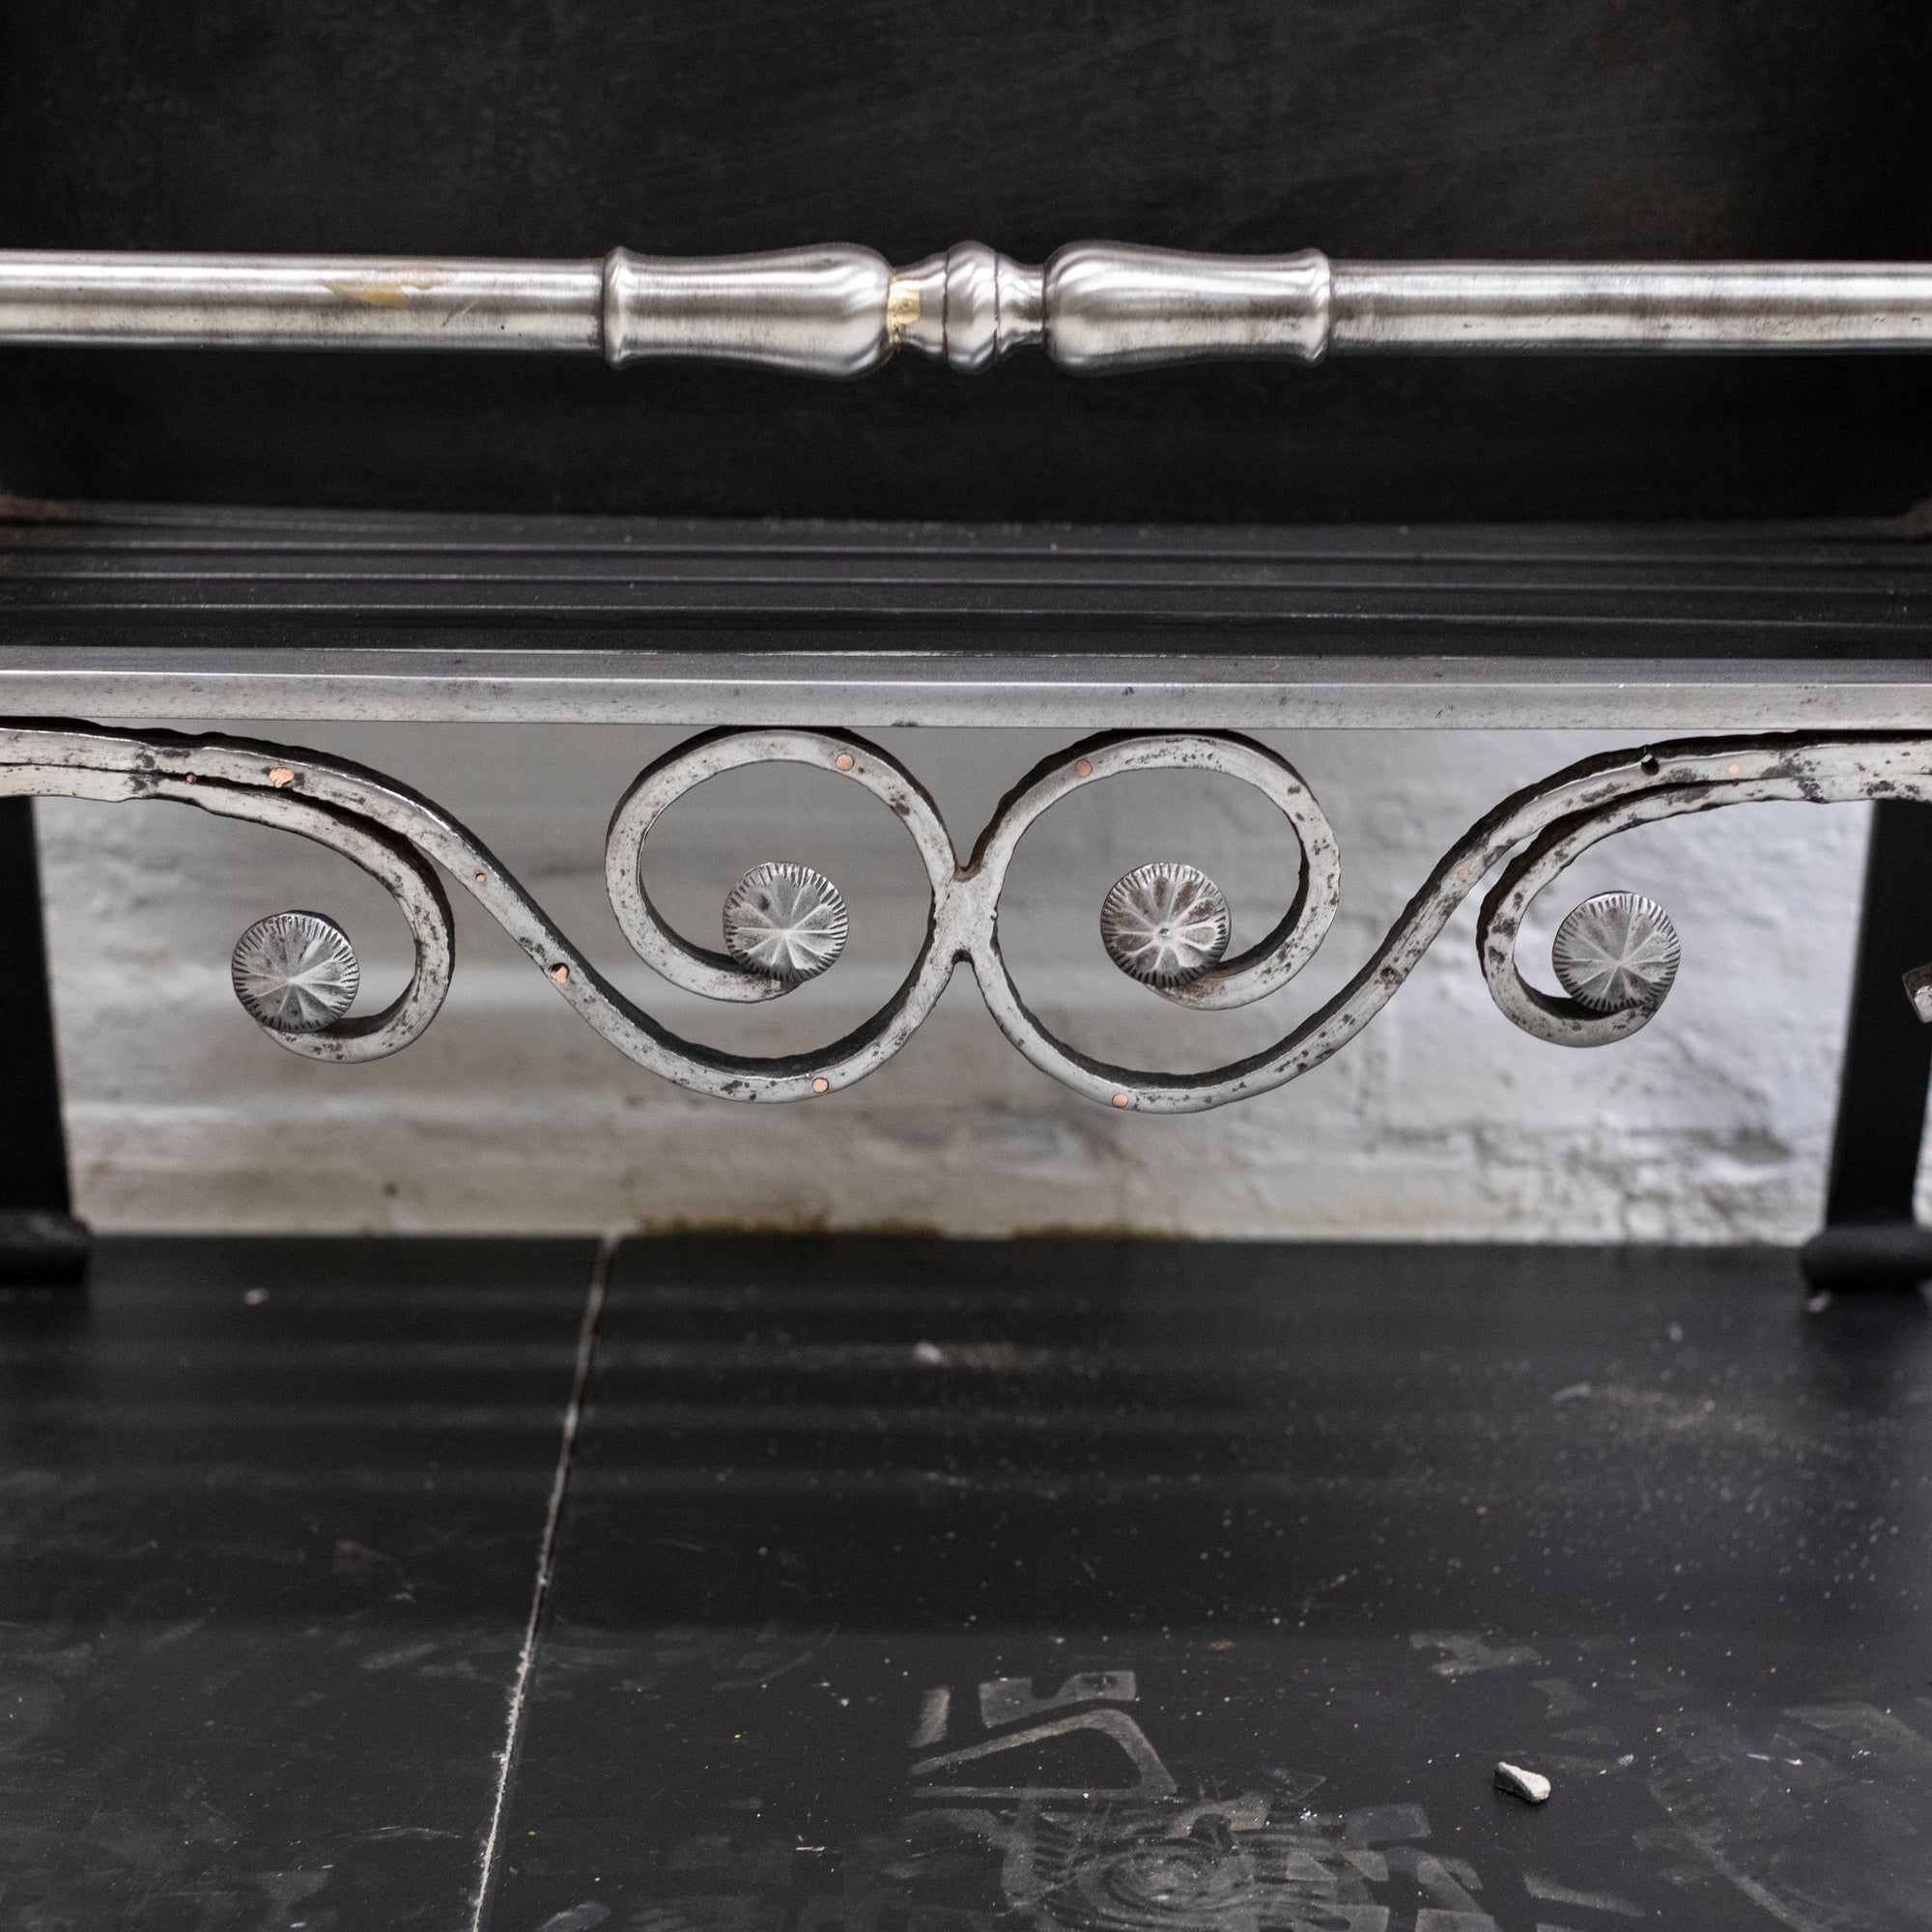 Antique Reclaimed Fire Basket | The Architectural Forum